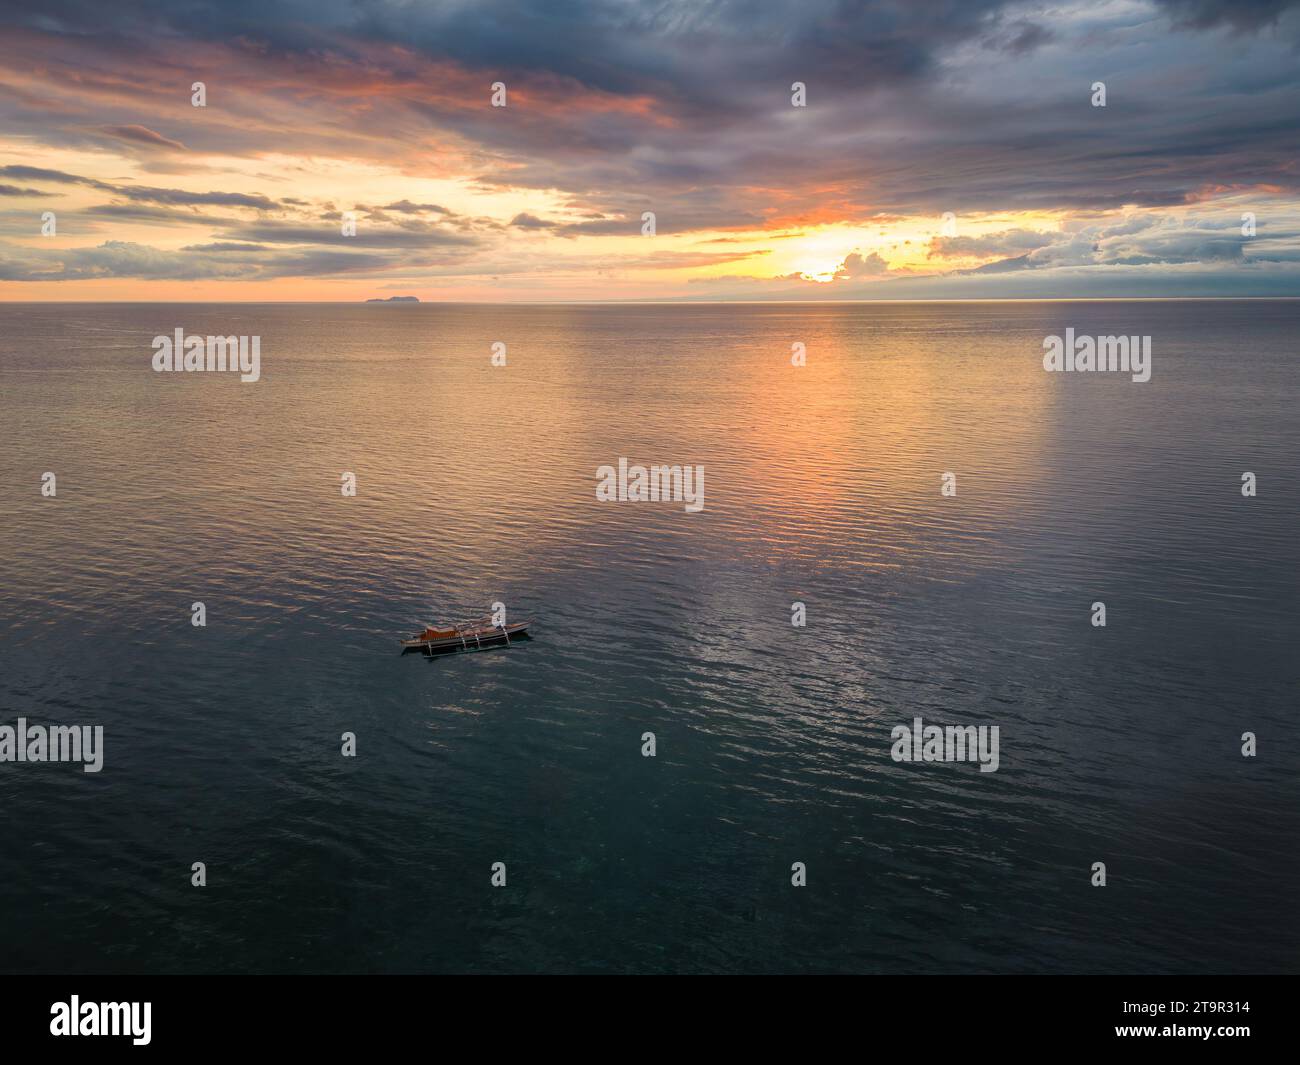 An aerial view of a boat in the sea at sunset at Siquijor, Philippines Stock Photo